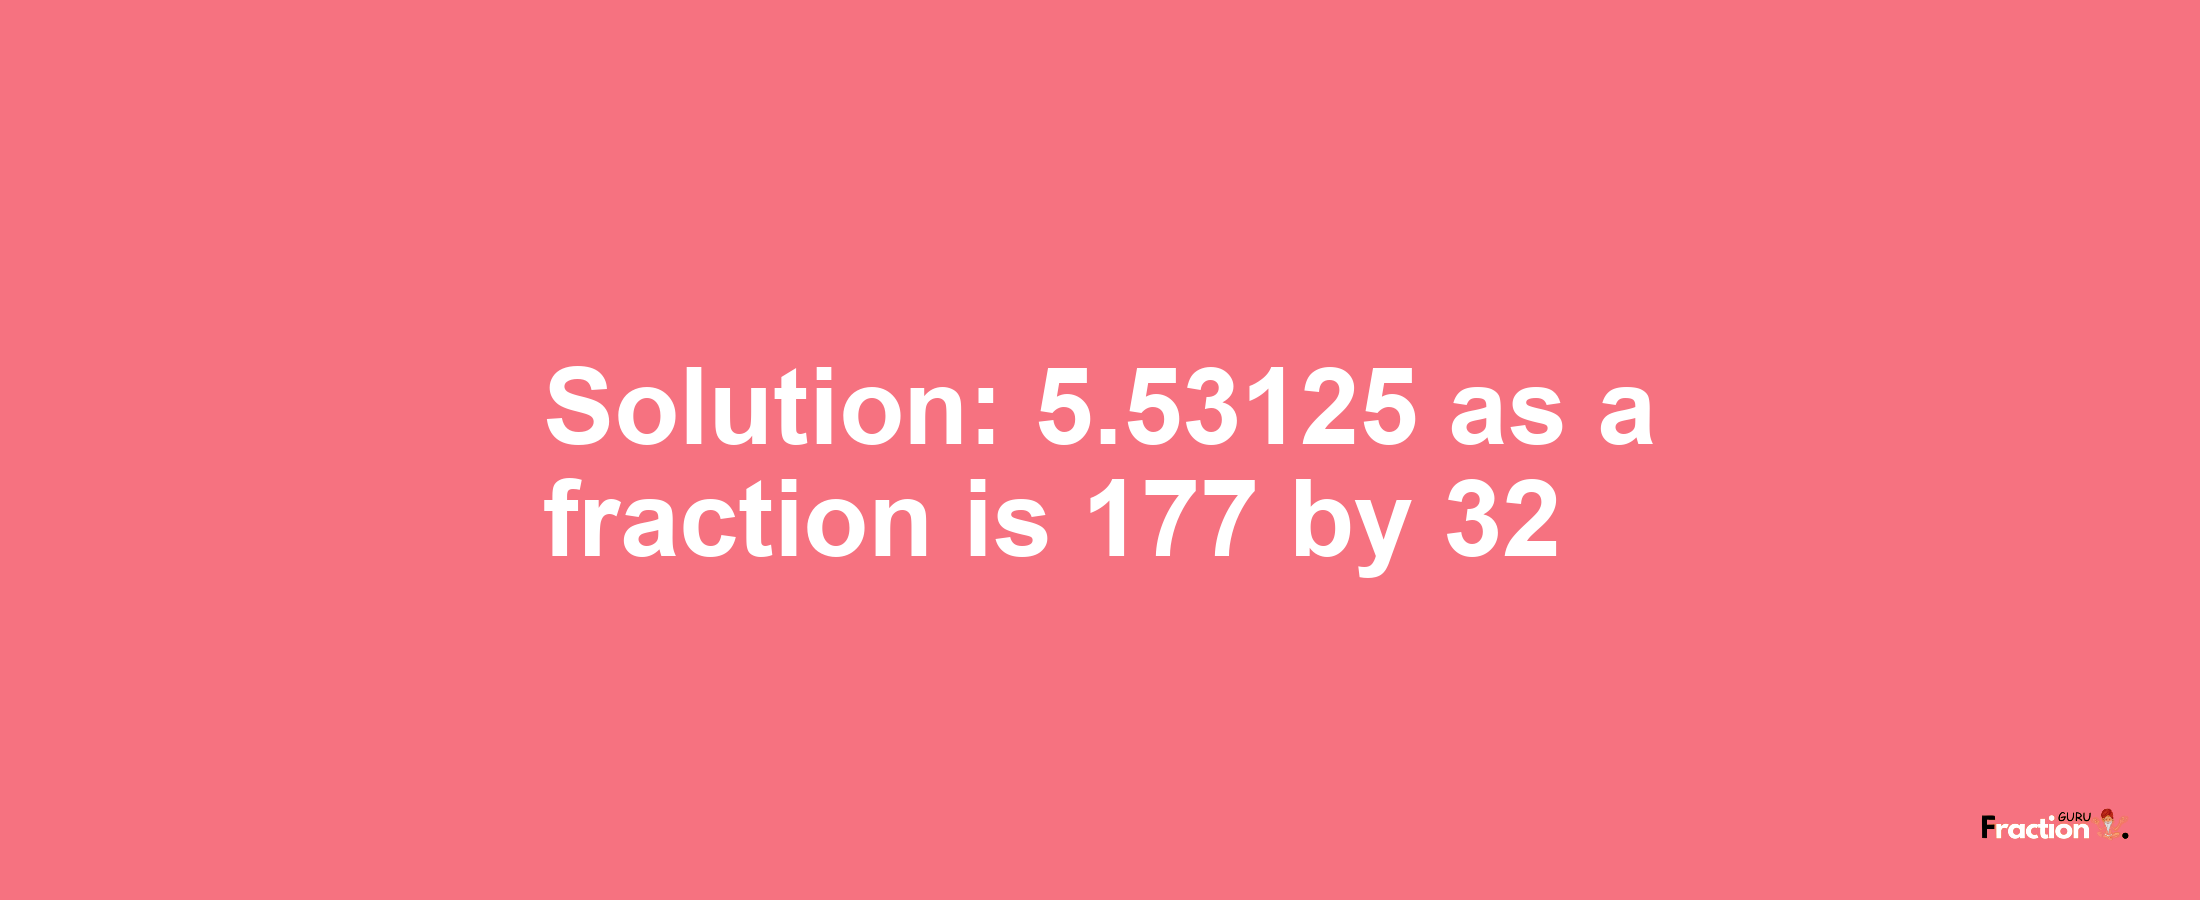 Solution:5.53125 as a fraction is 177/32